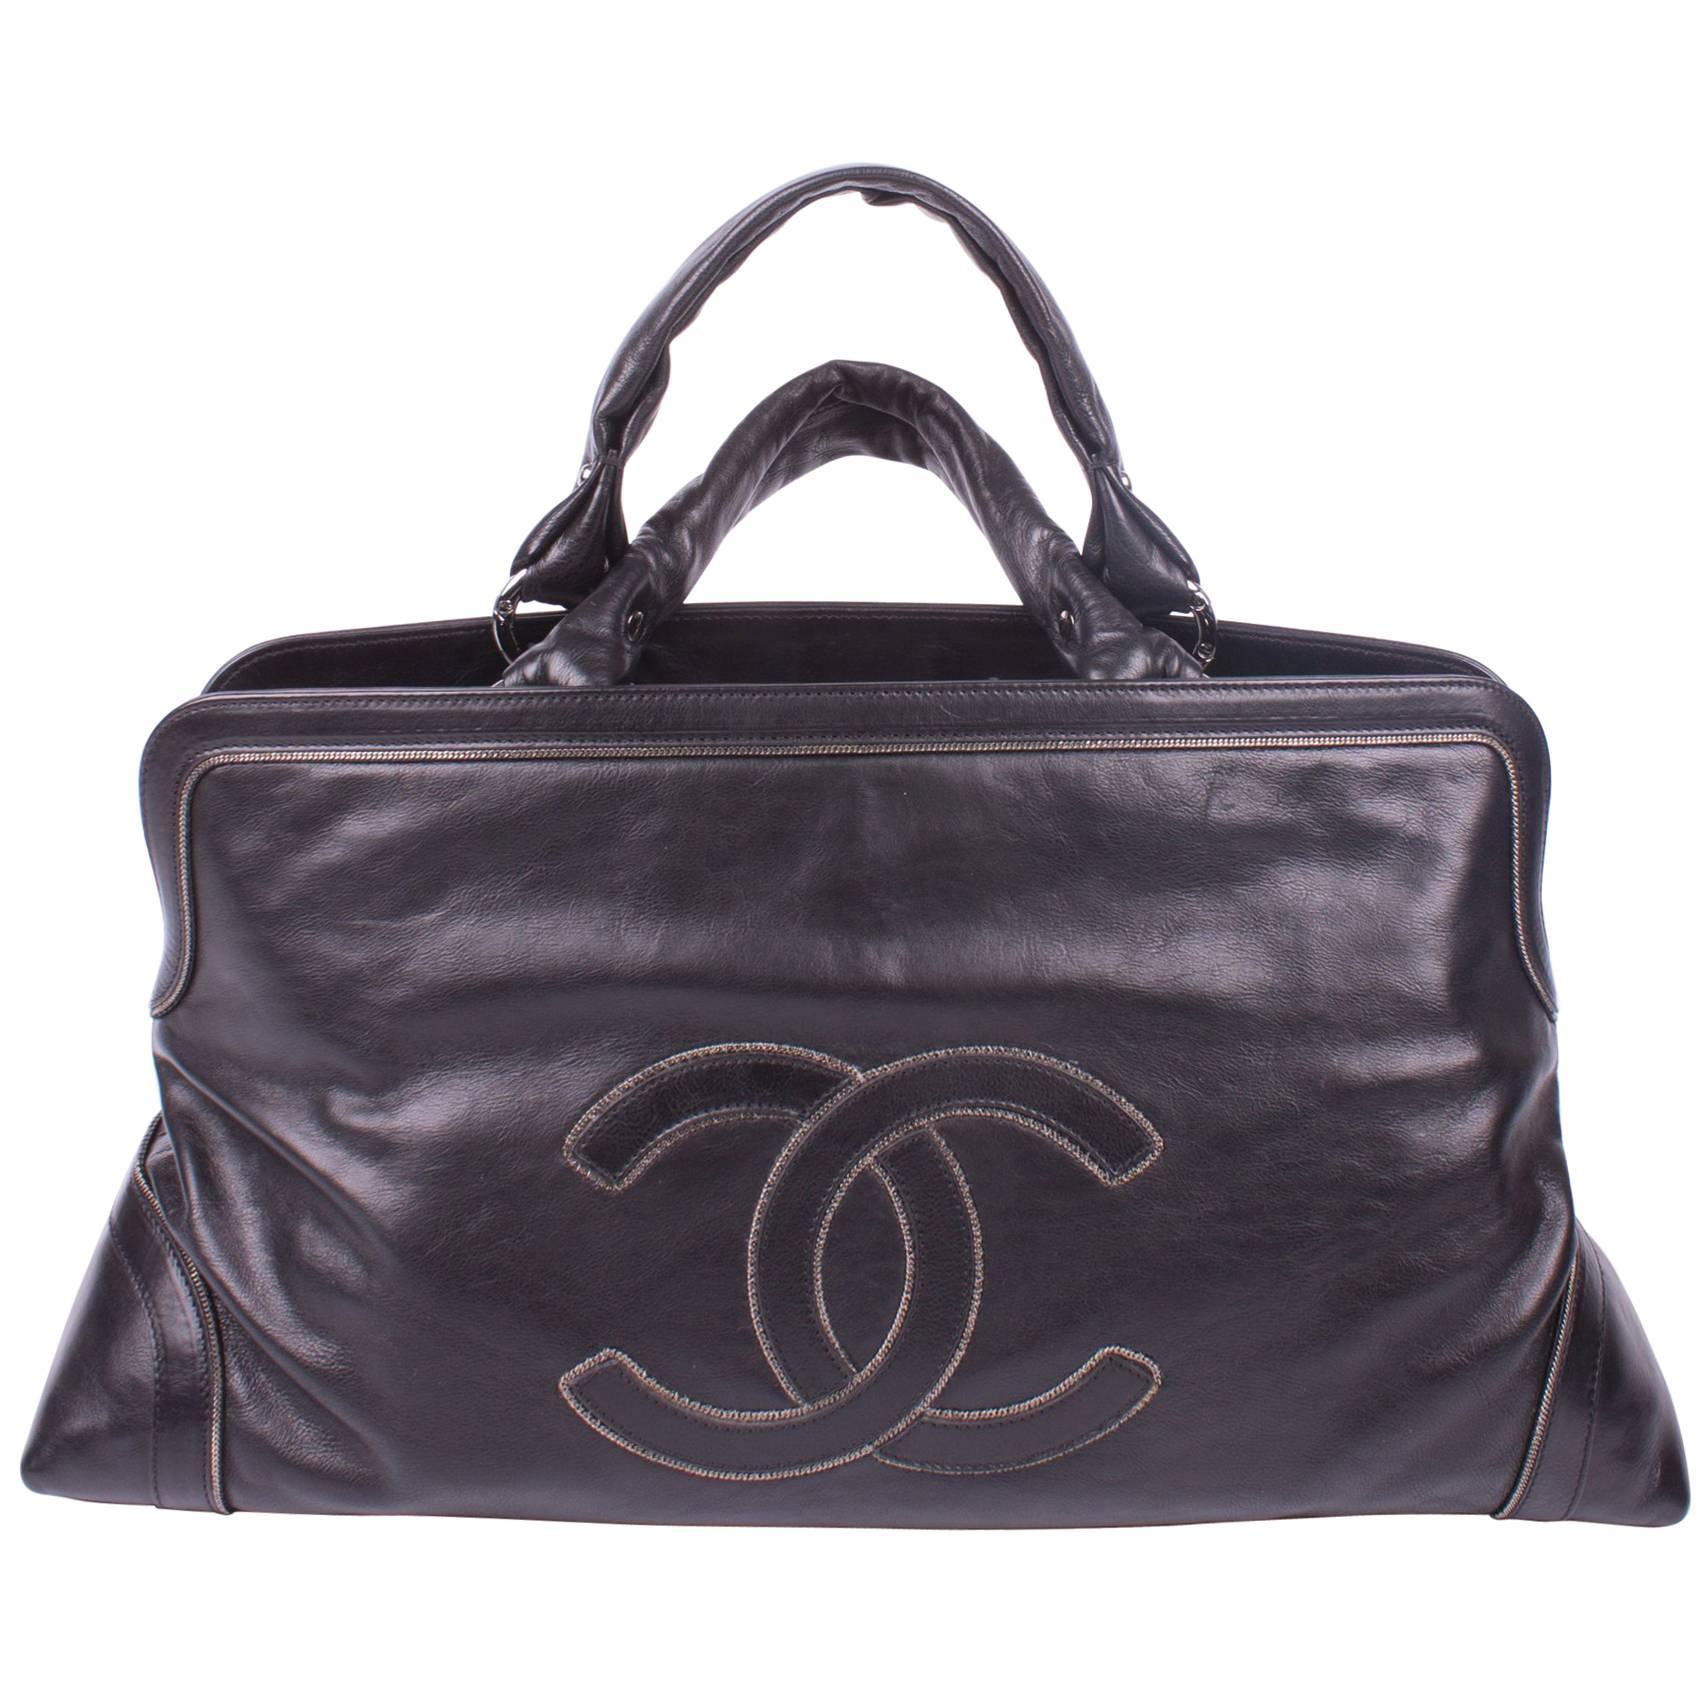 Chanel Tote Bag with Chain Trim - black leather 